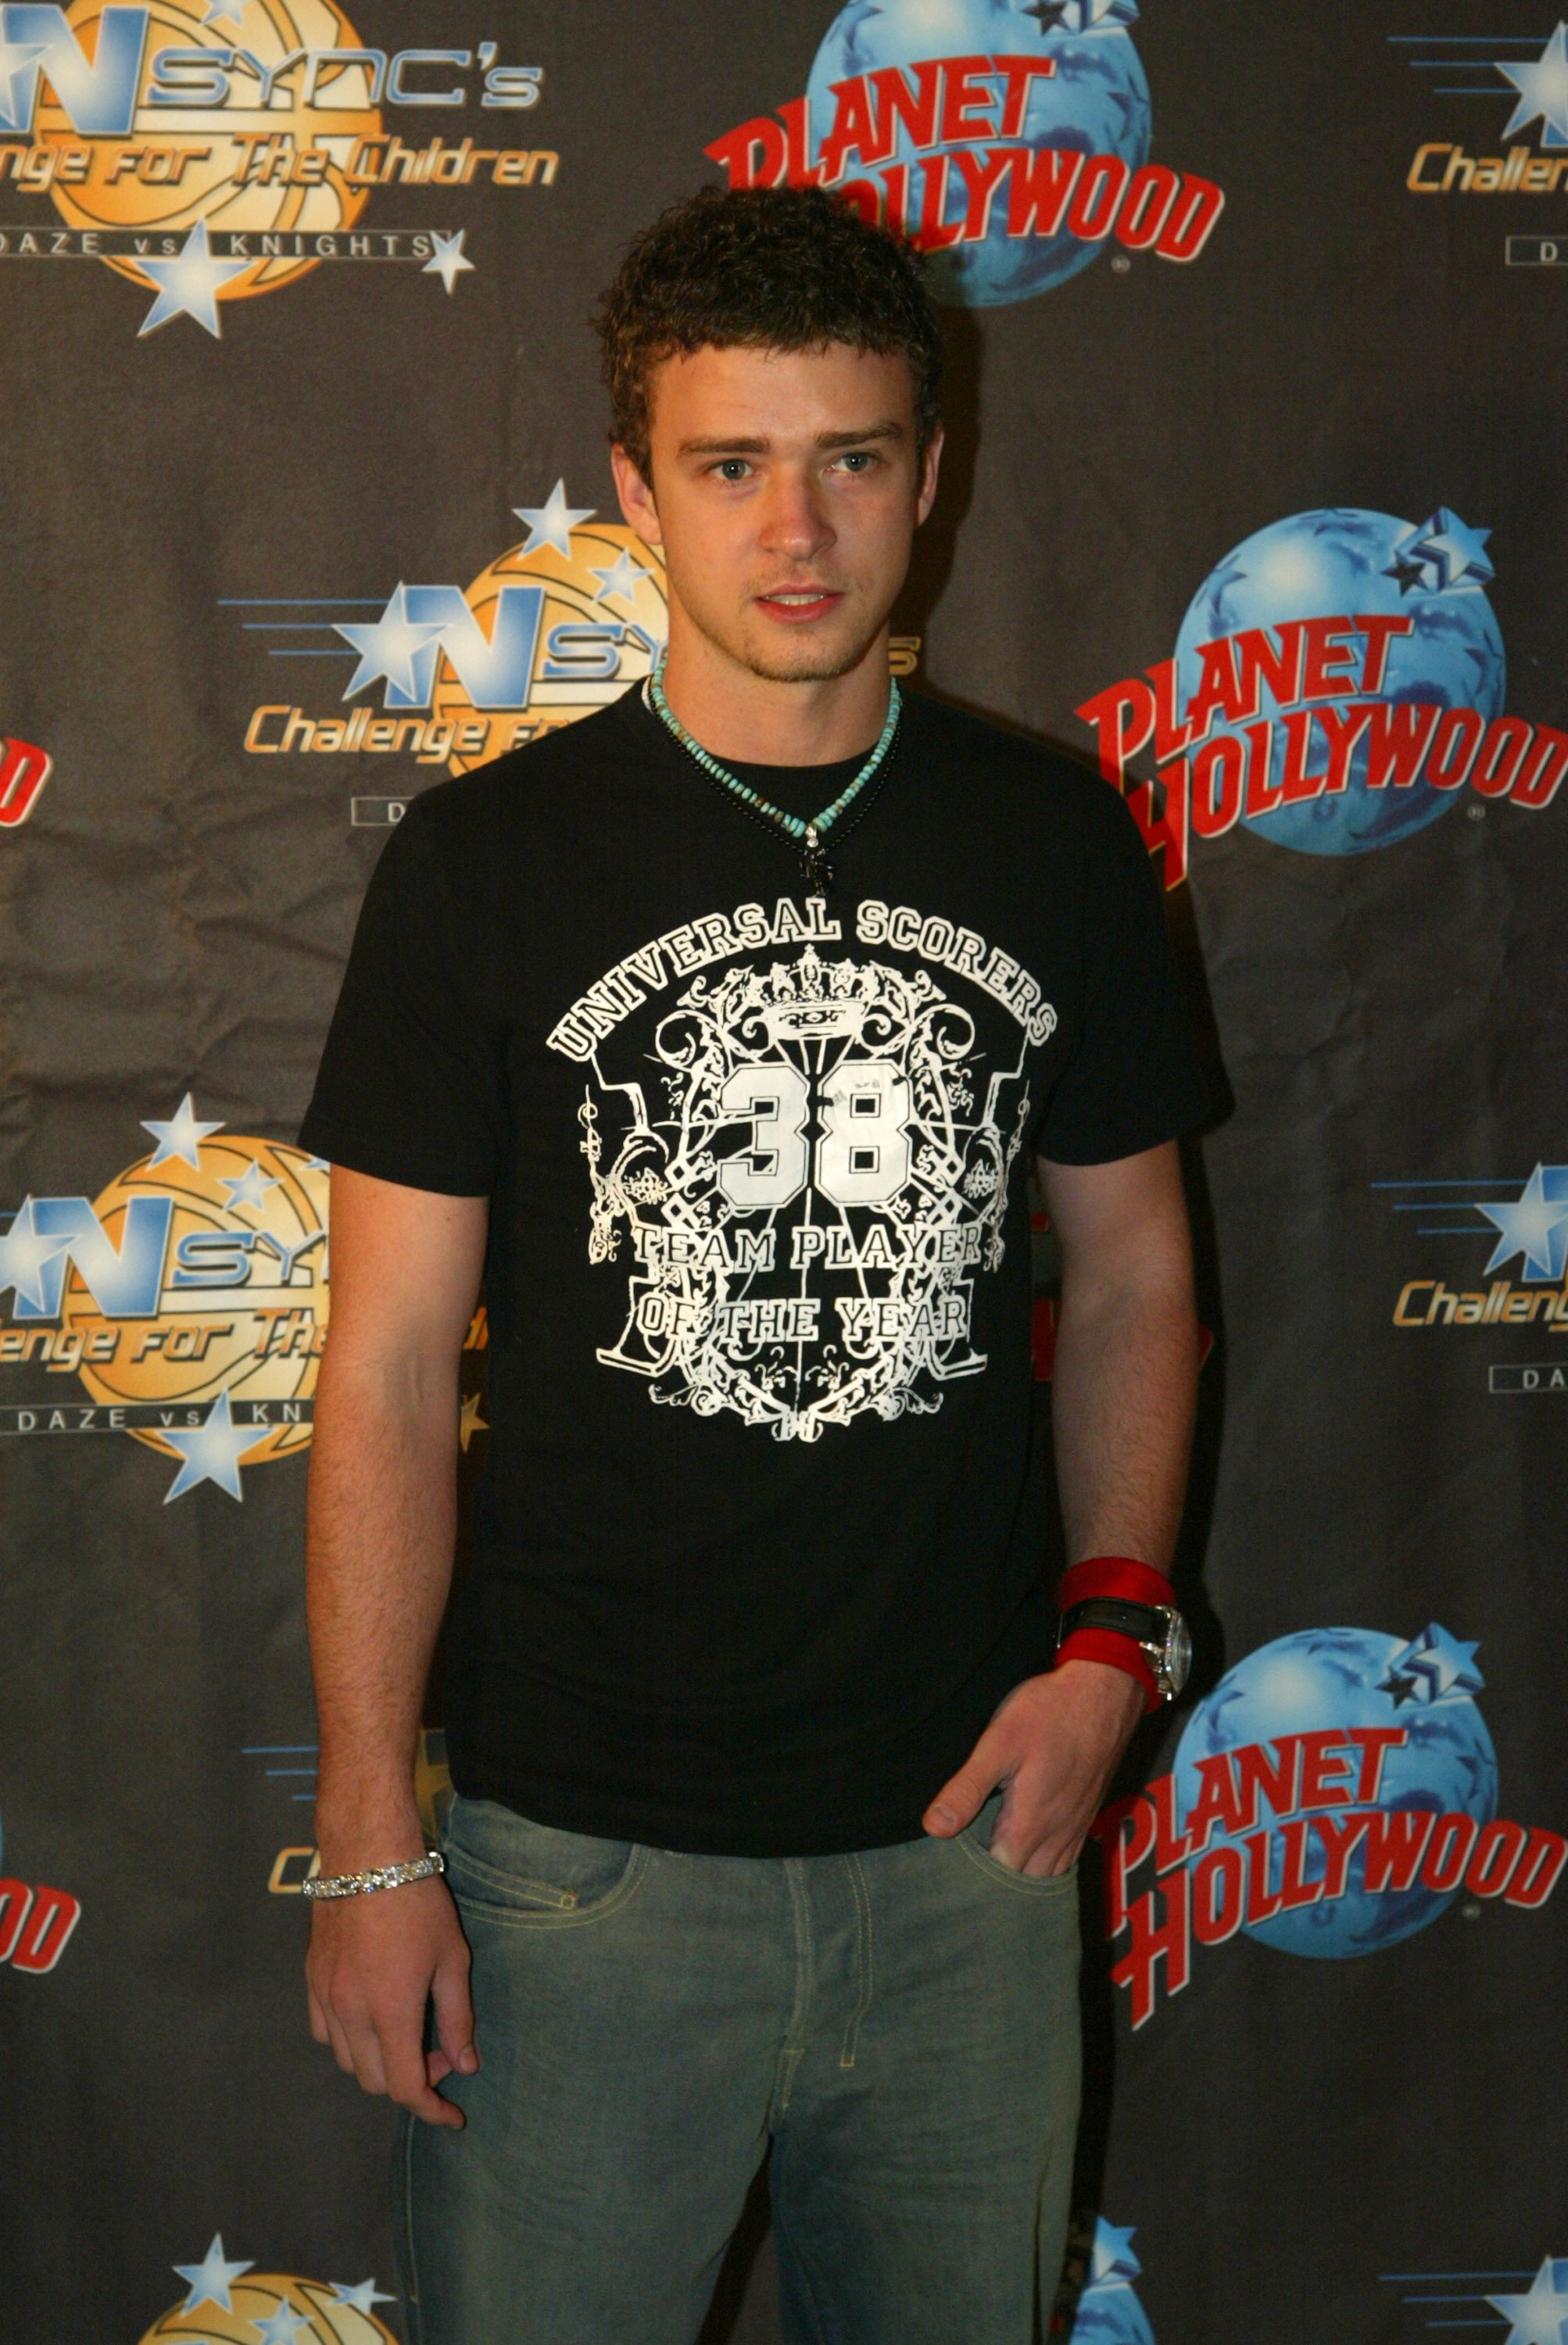 Close-up of Justin at a media event with curly hair and wearing jeans and a T-shirt